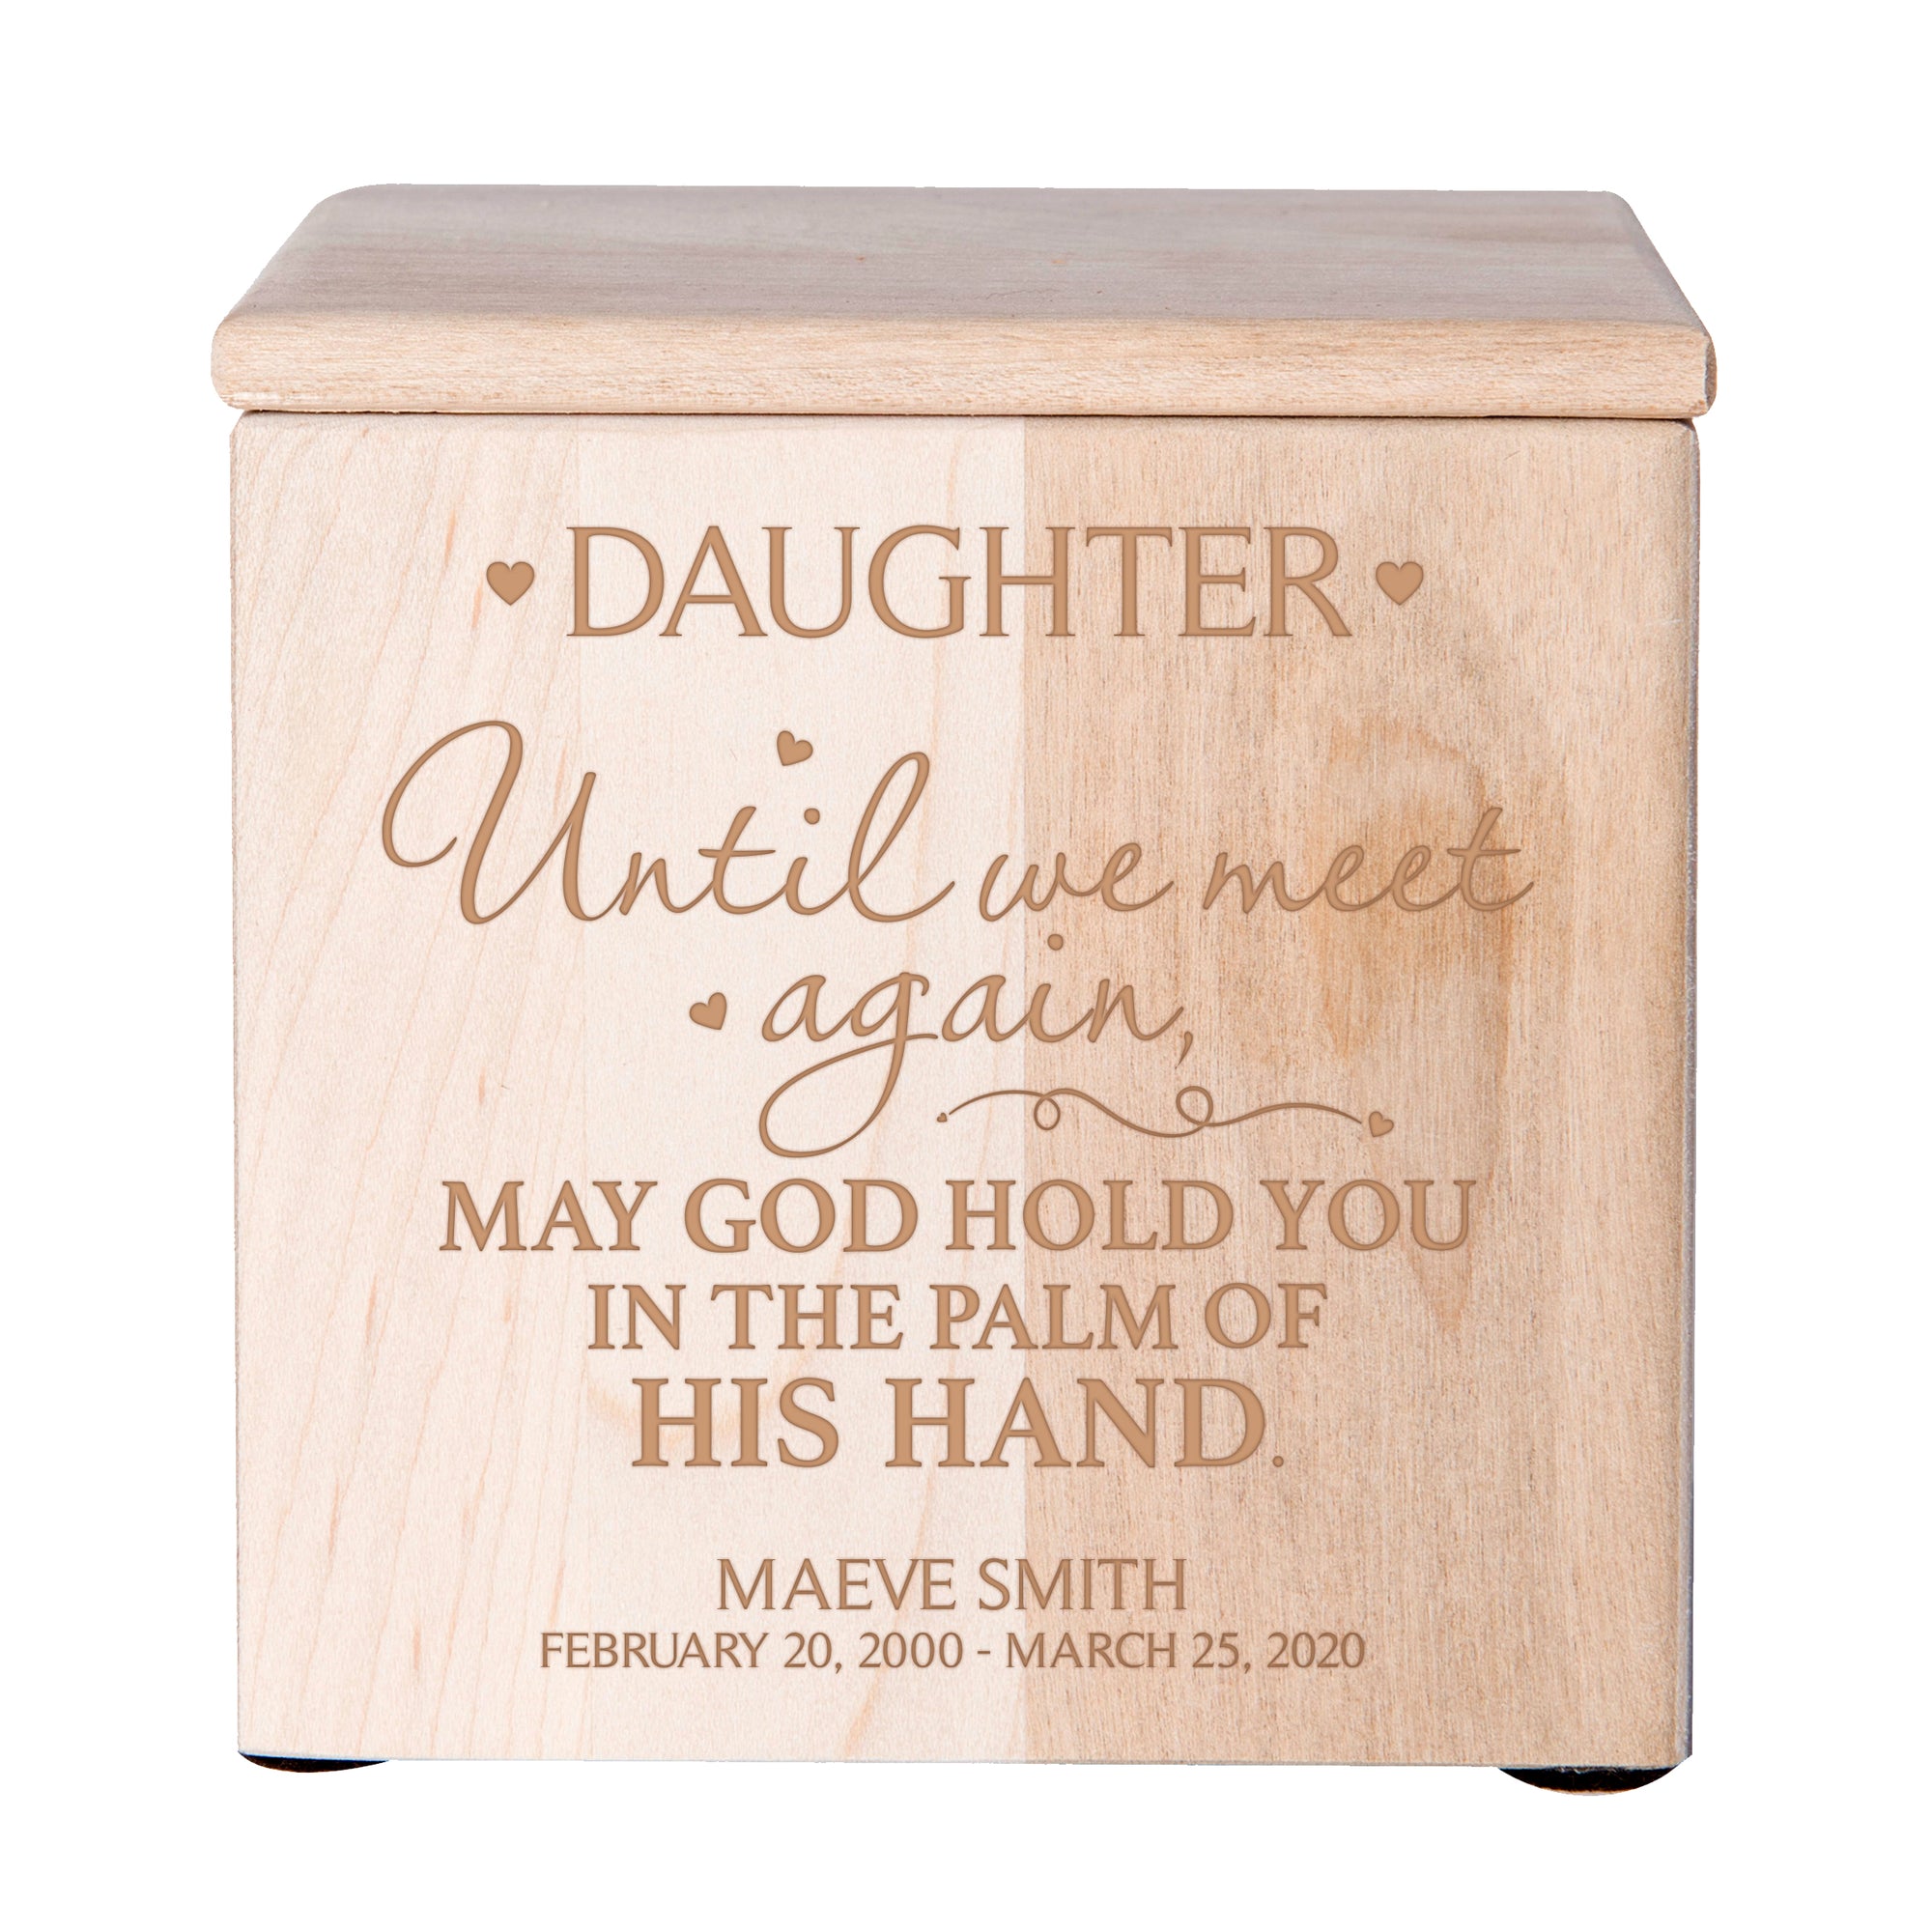 Custom Engraved Memorial 4.5x4.5in Cremation Urn Box Holds 49 Cu Inches Of Human Ashes (Until We Meet Again Daughter) Funeral and Condolence Keepsake. Sympathy Gift for the Loss of a Loved One Bereavement Gift for Family Friends Condolence Sympathy Comfort Keepsake Funeral Decoration. Cremation Urns, urn for ashes, urns for humans, urns for dad, urns for mom, urns for sale, urns for human ashes, pet urns, cherished urns, small urns, small urns for ashes, Wooden Urns